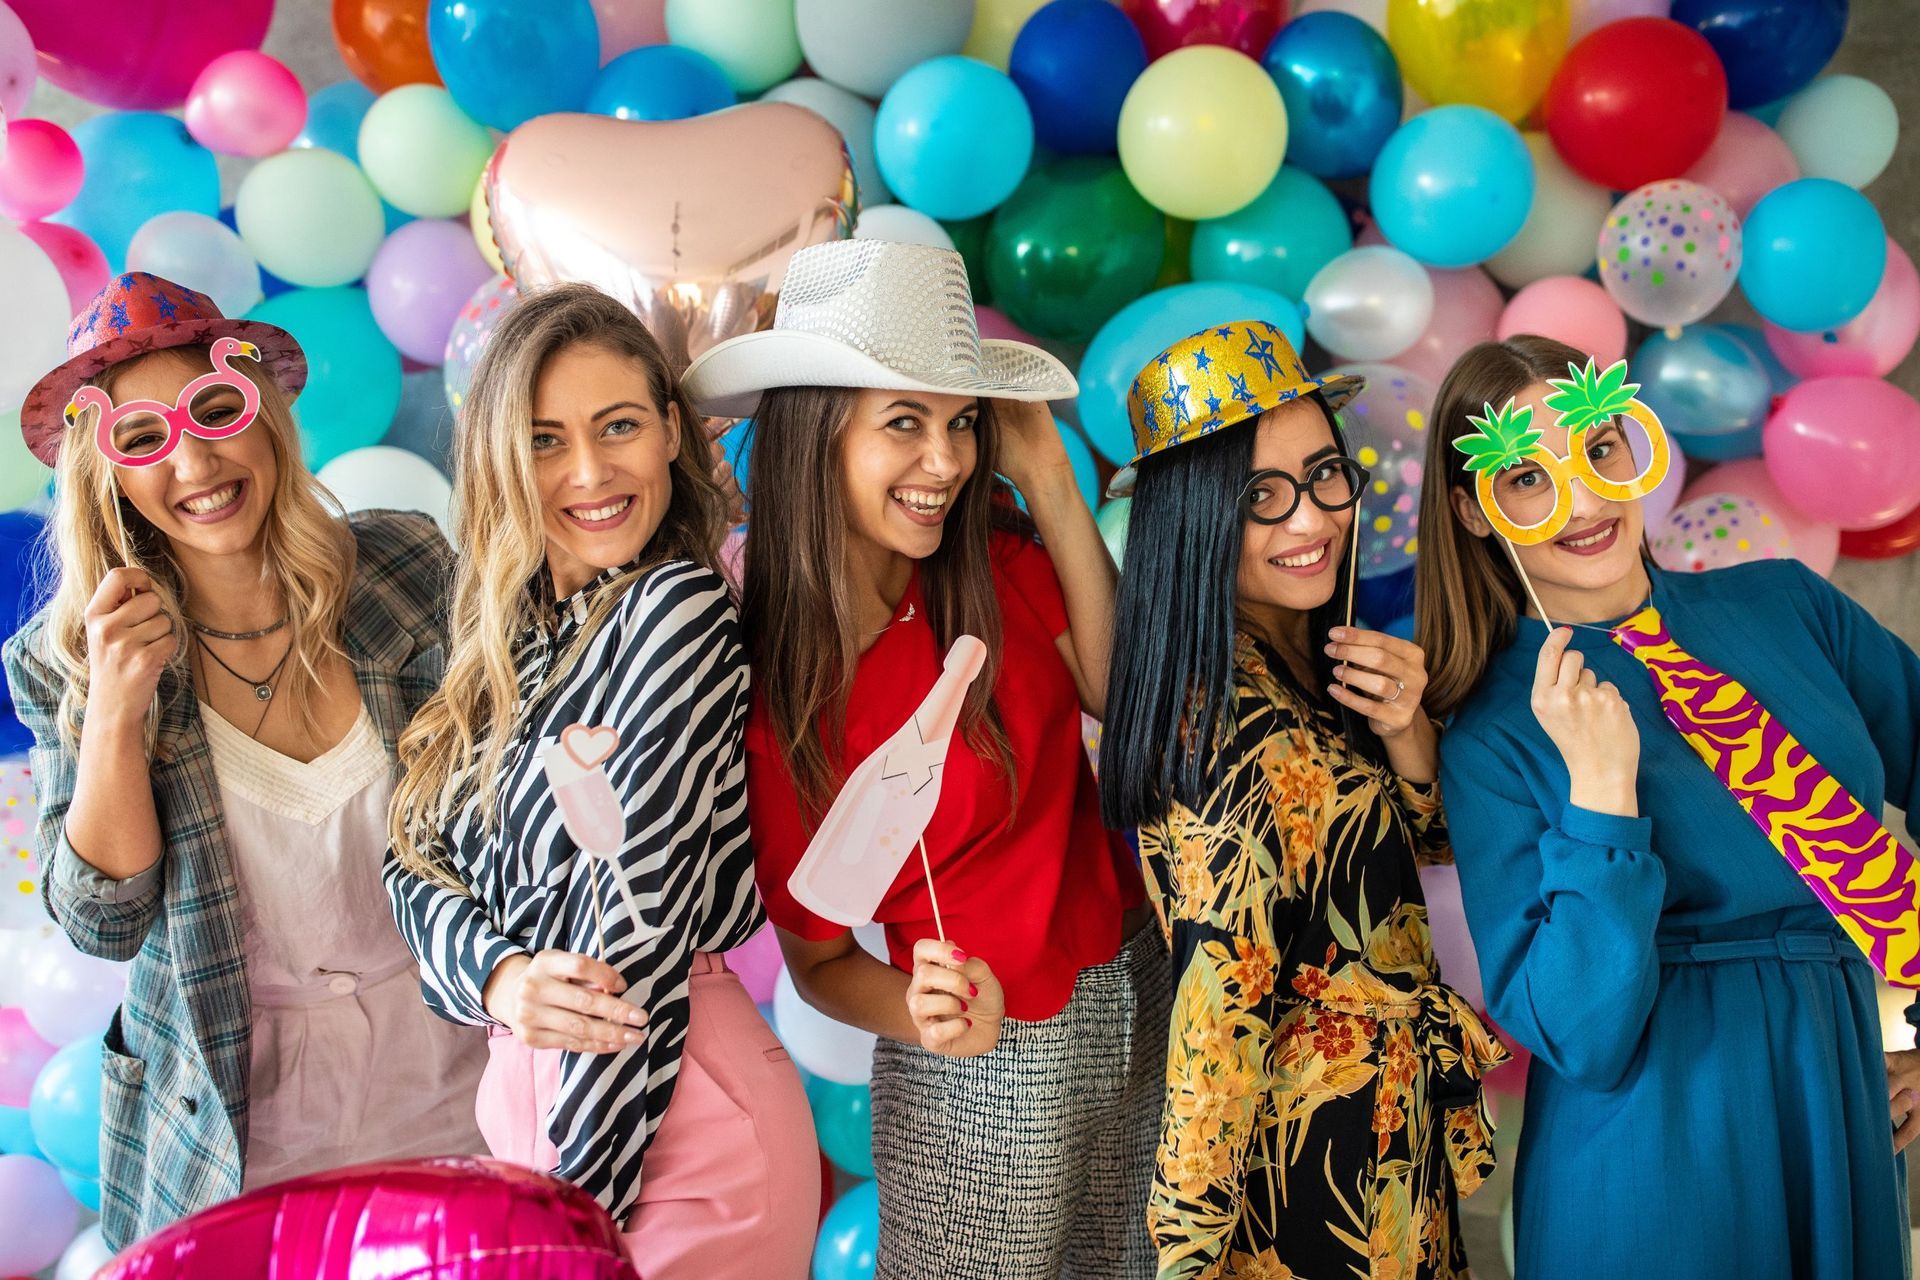 Sharing laughter and creating memories at our Manor, Texas Flash Party Photo Booth during an epic birthday bash!